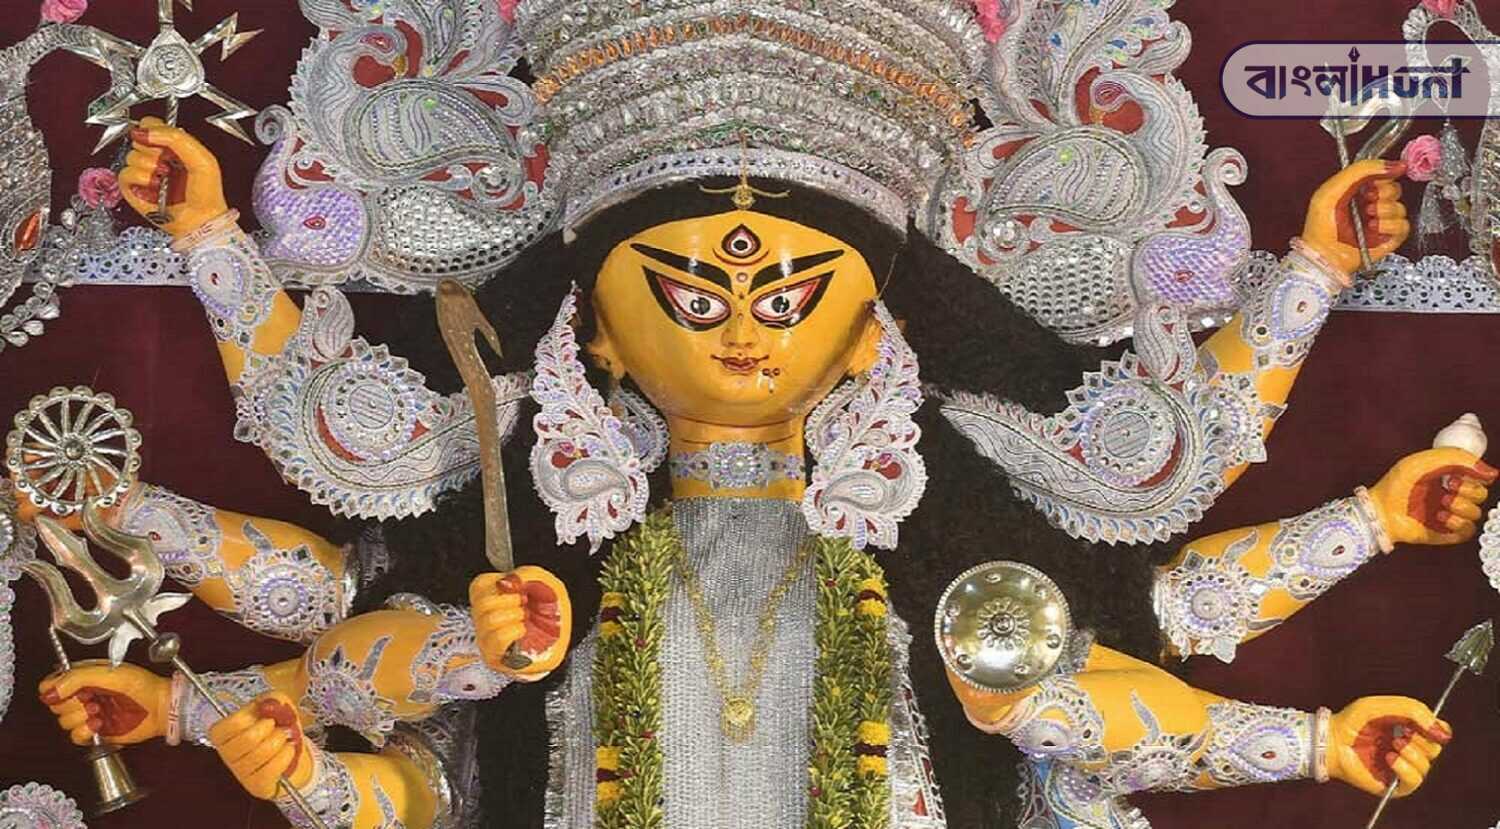 Who introduced Durga Puja first in Bengal 